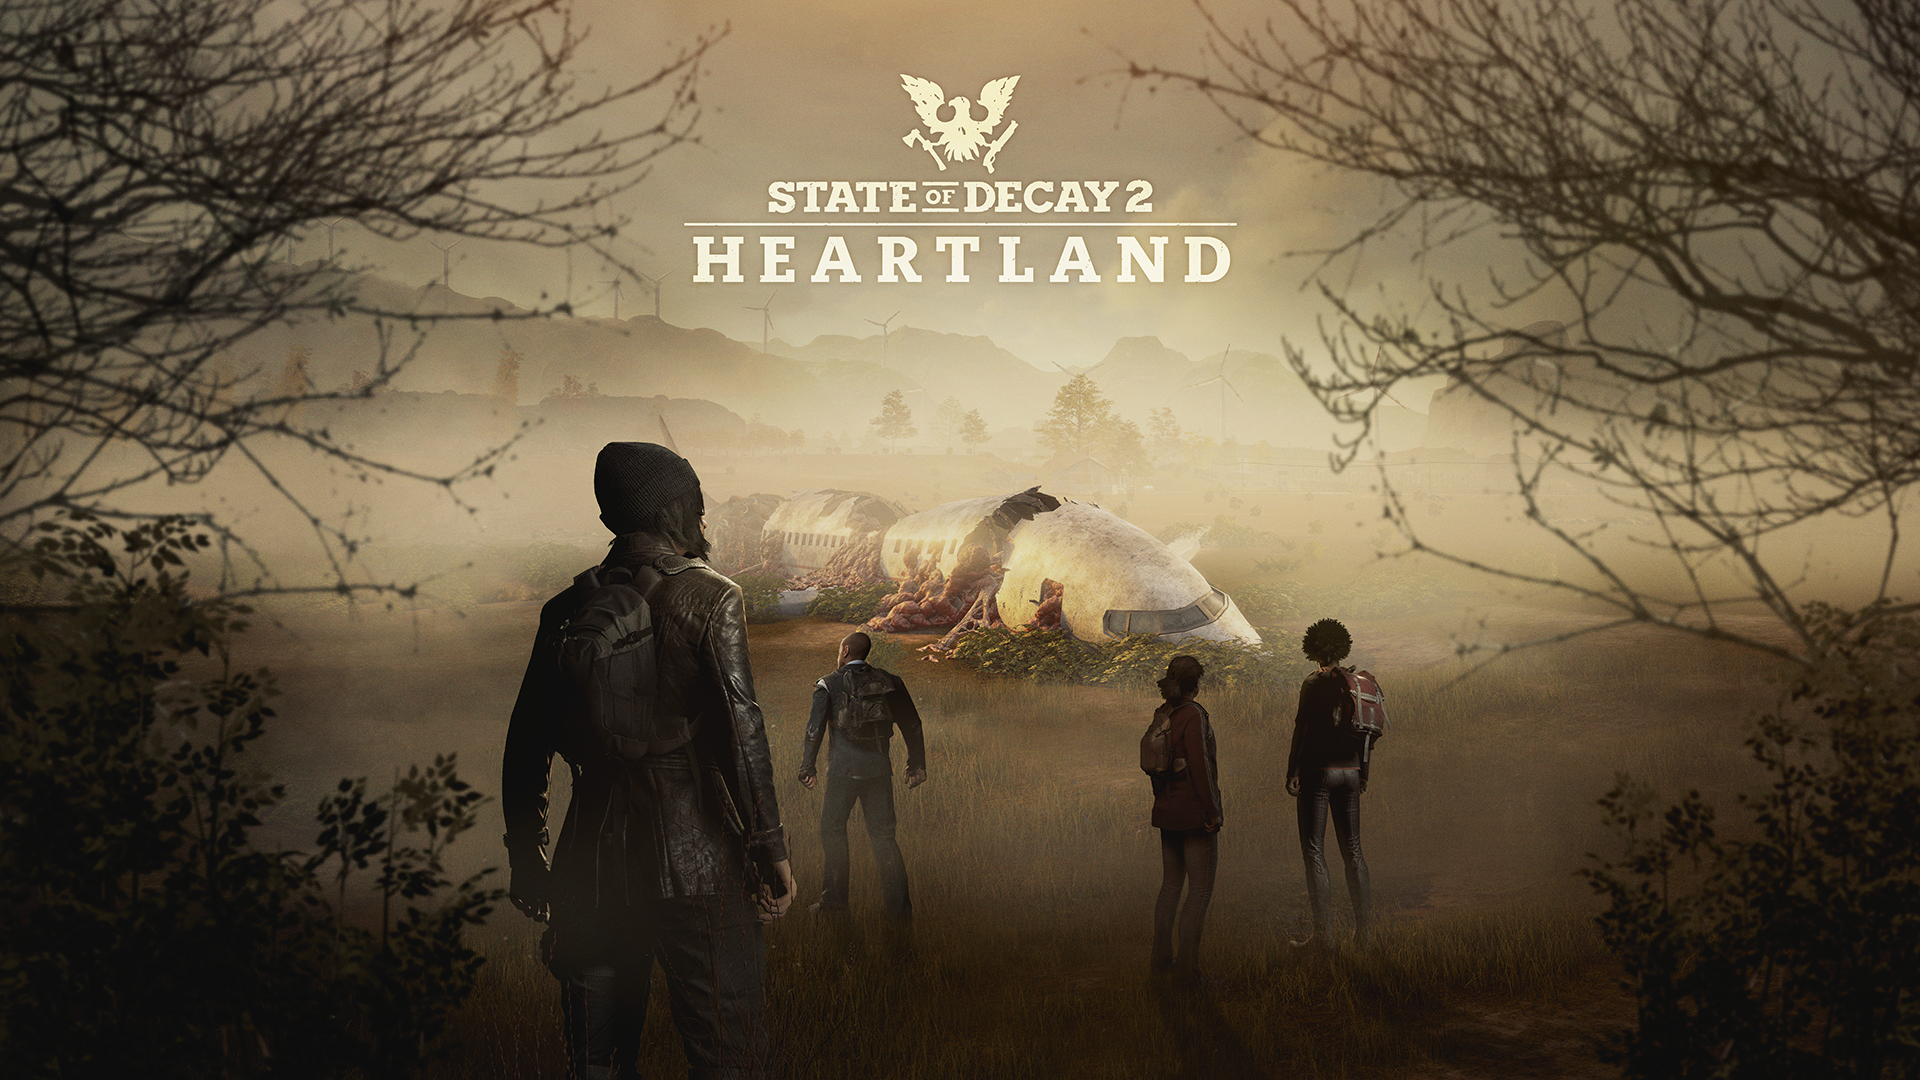 State of Decay 2 Twitter Key Art with logo